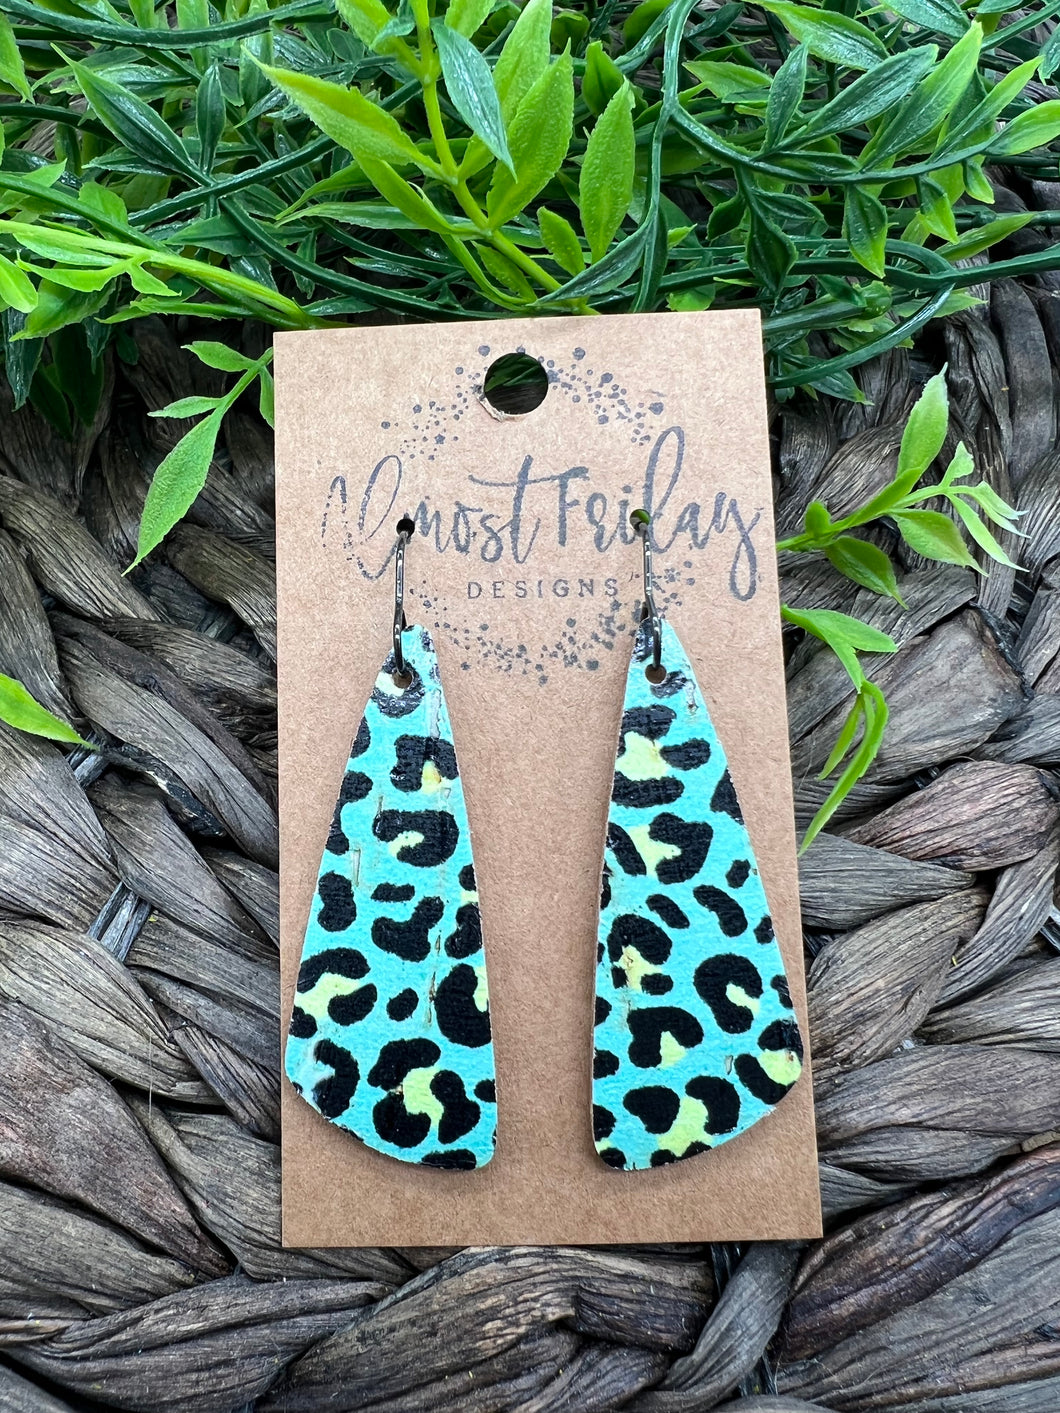 Genuine Leather Earrings - Triangle - Yellow - Neon - Teal and Black Earrings - Leopard Design - Statement Earrings - Animal Print - Colorful